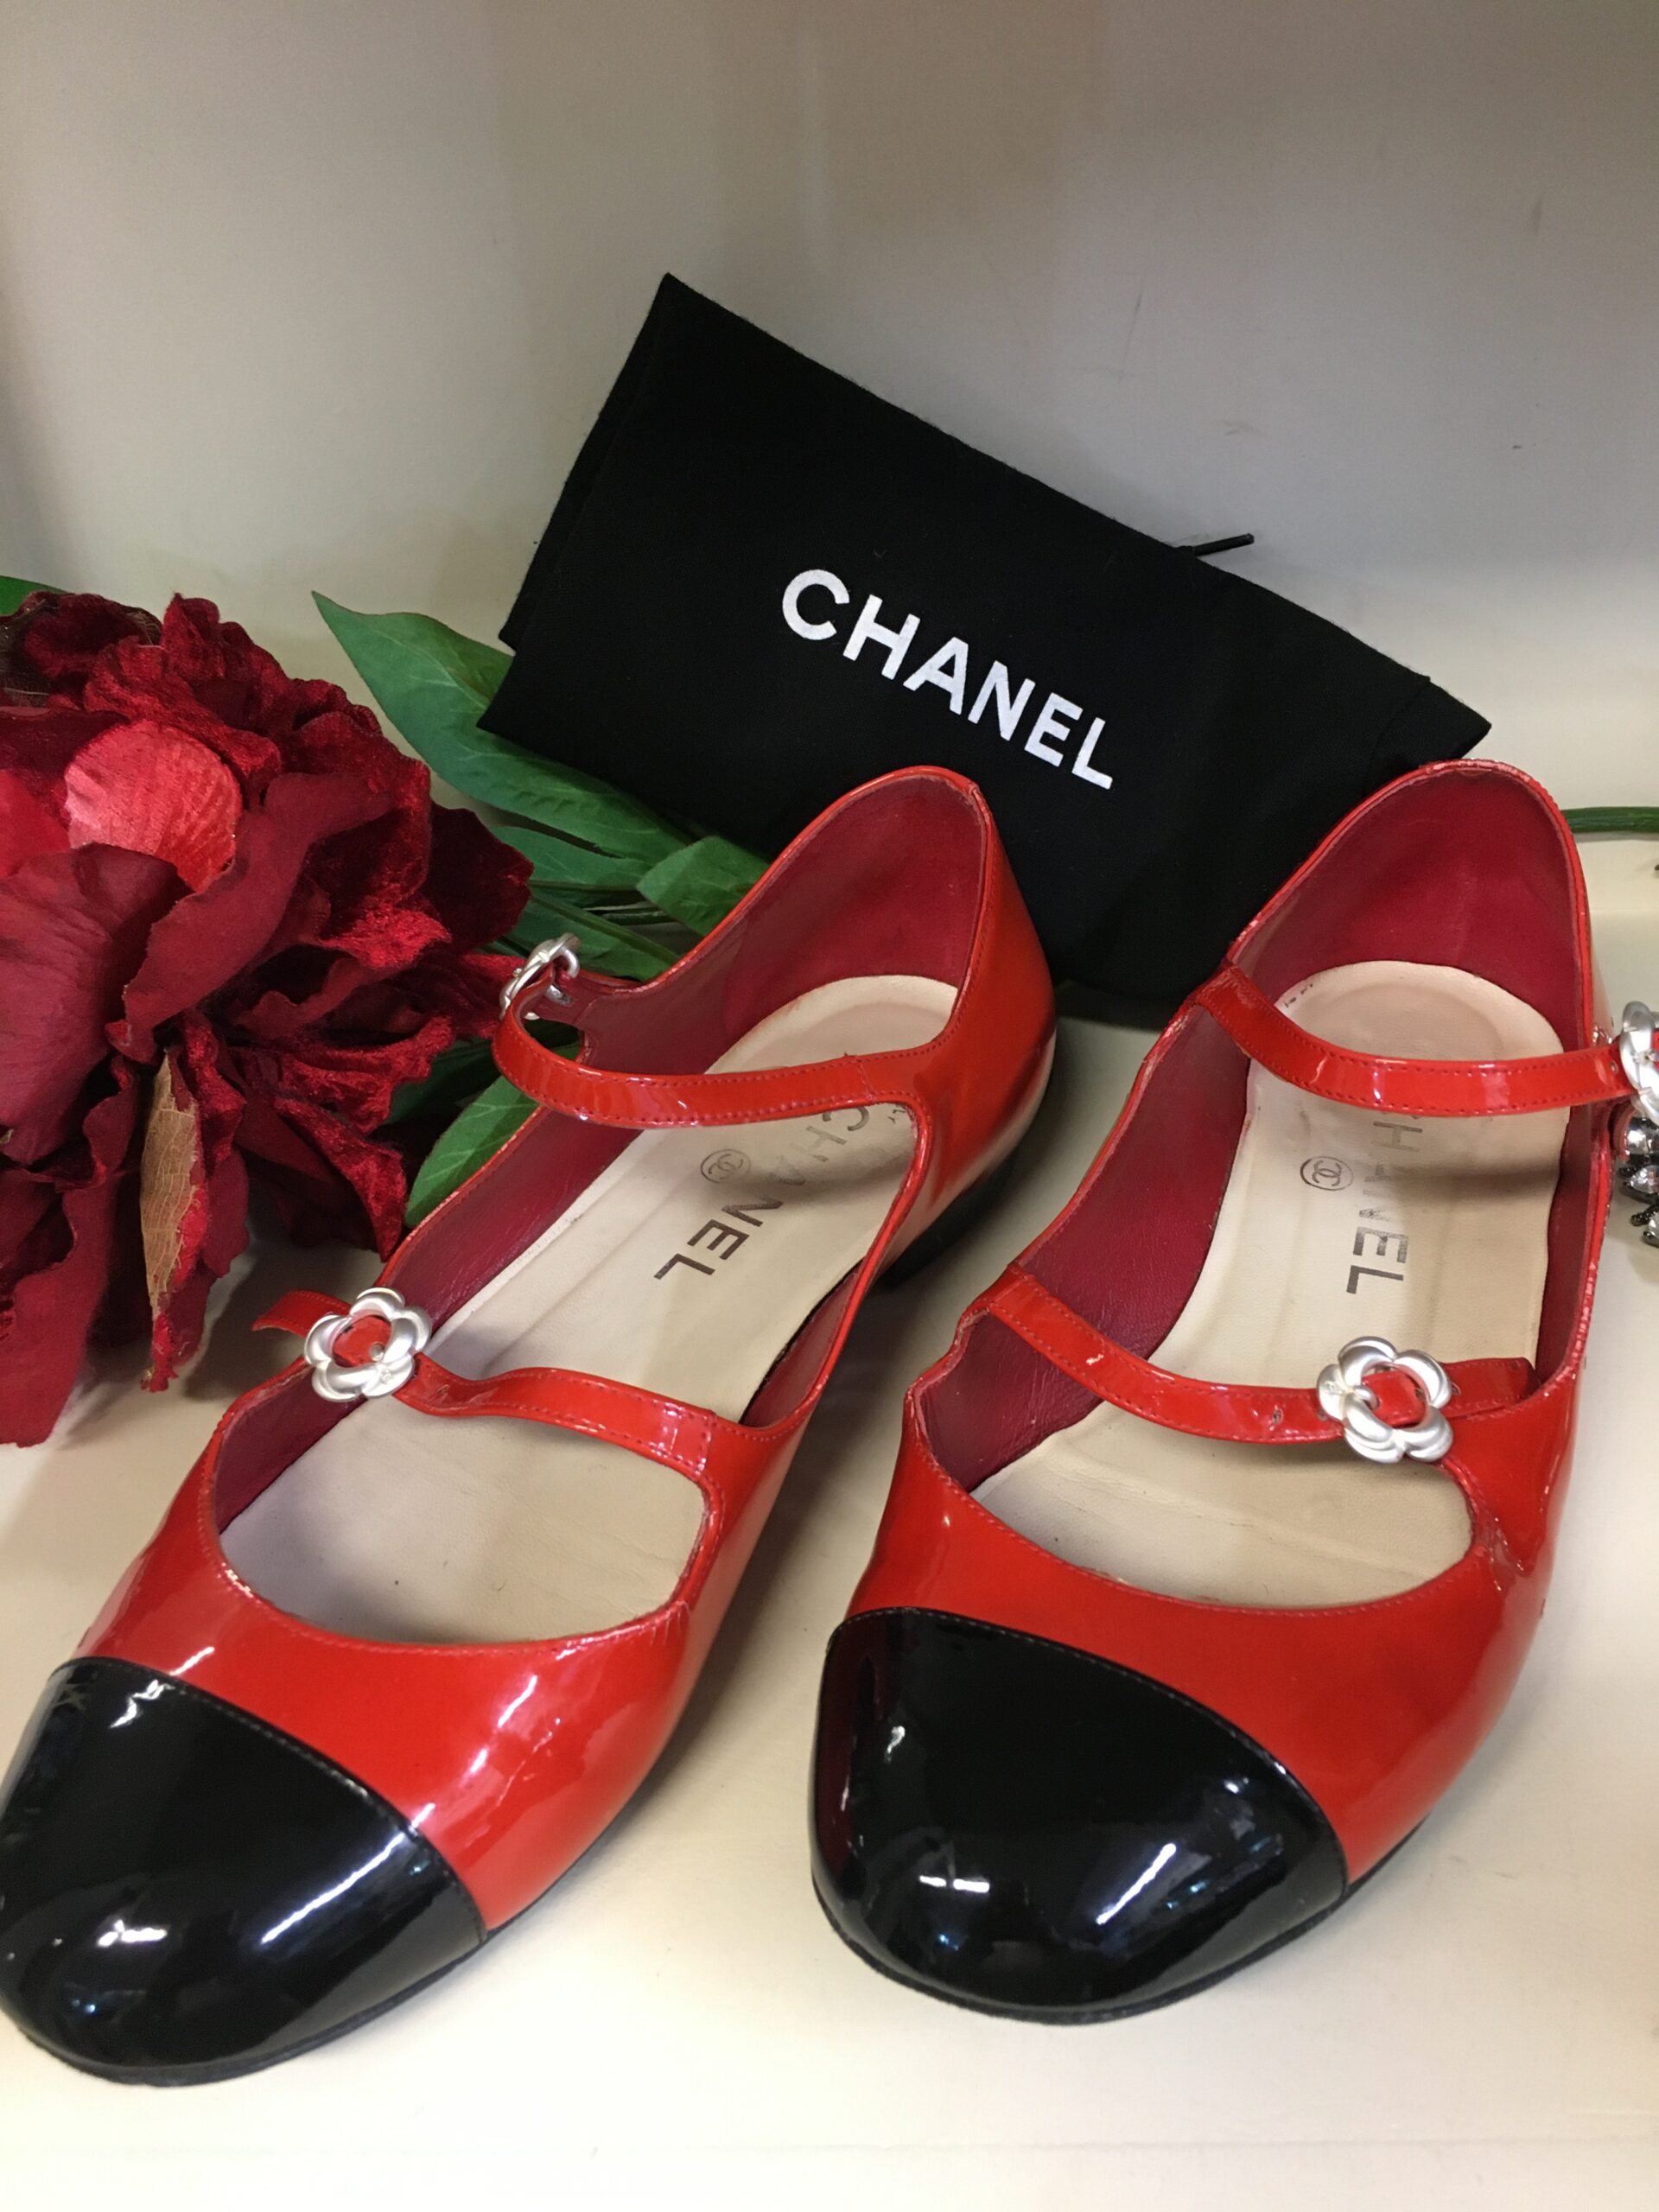 Chia sẻ 73+ về mary jane chanel shoes 